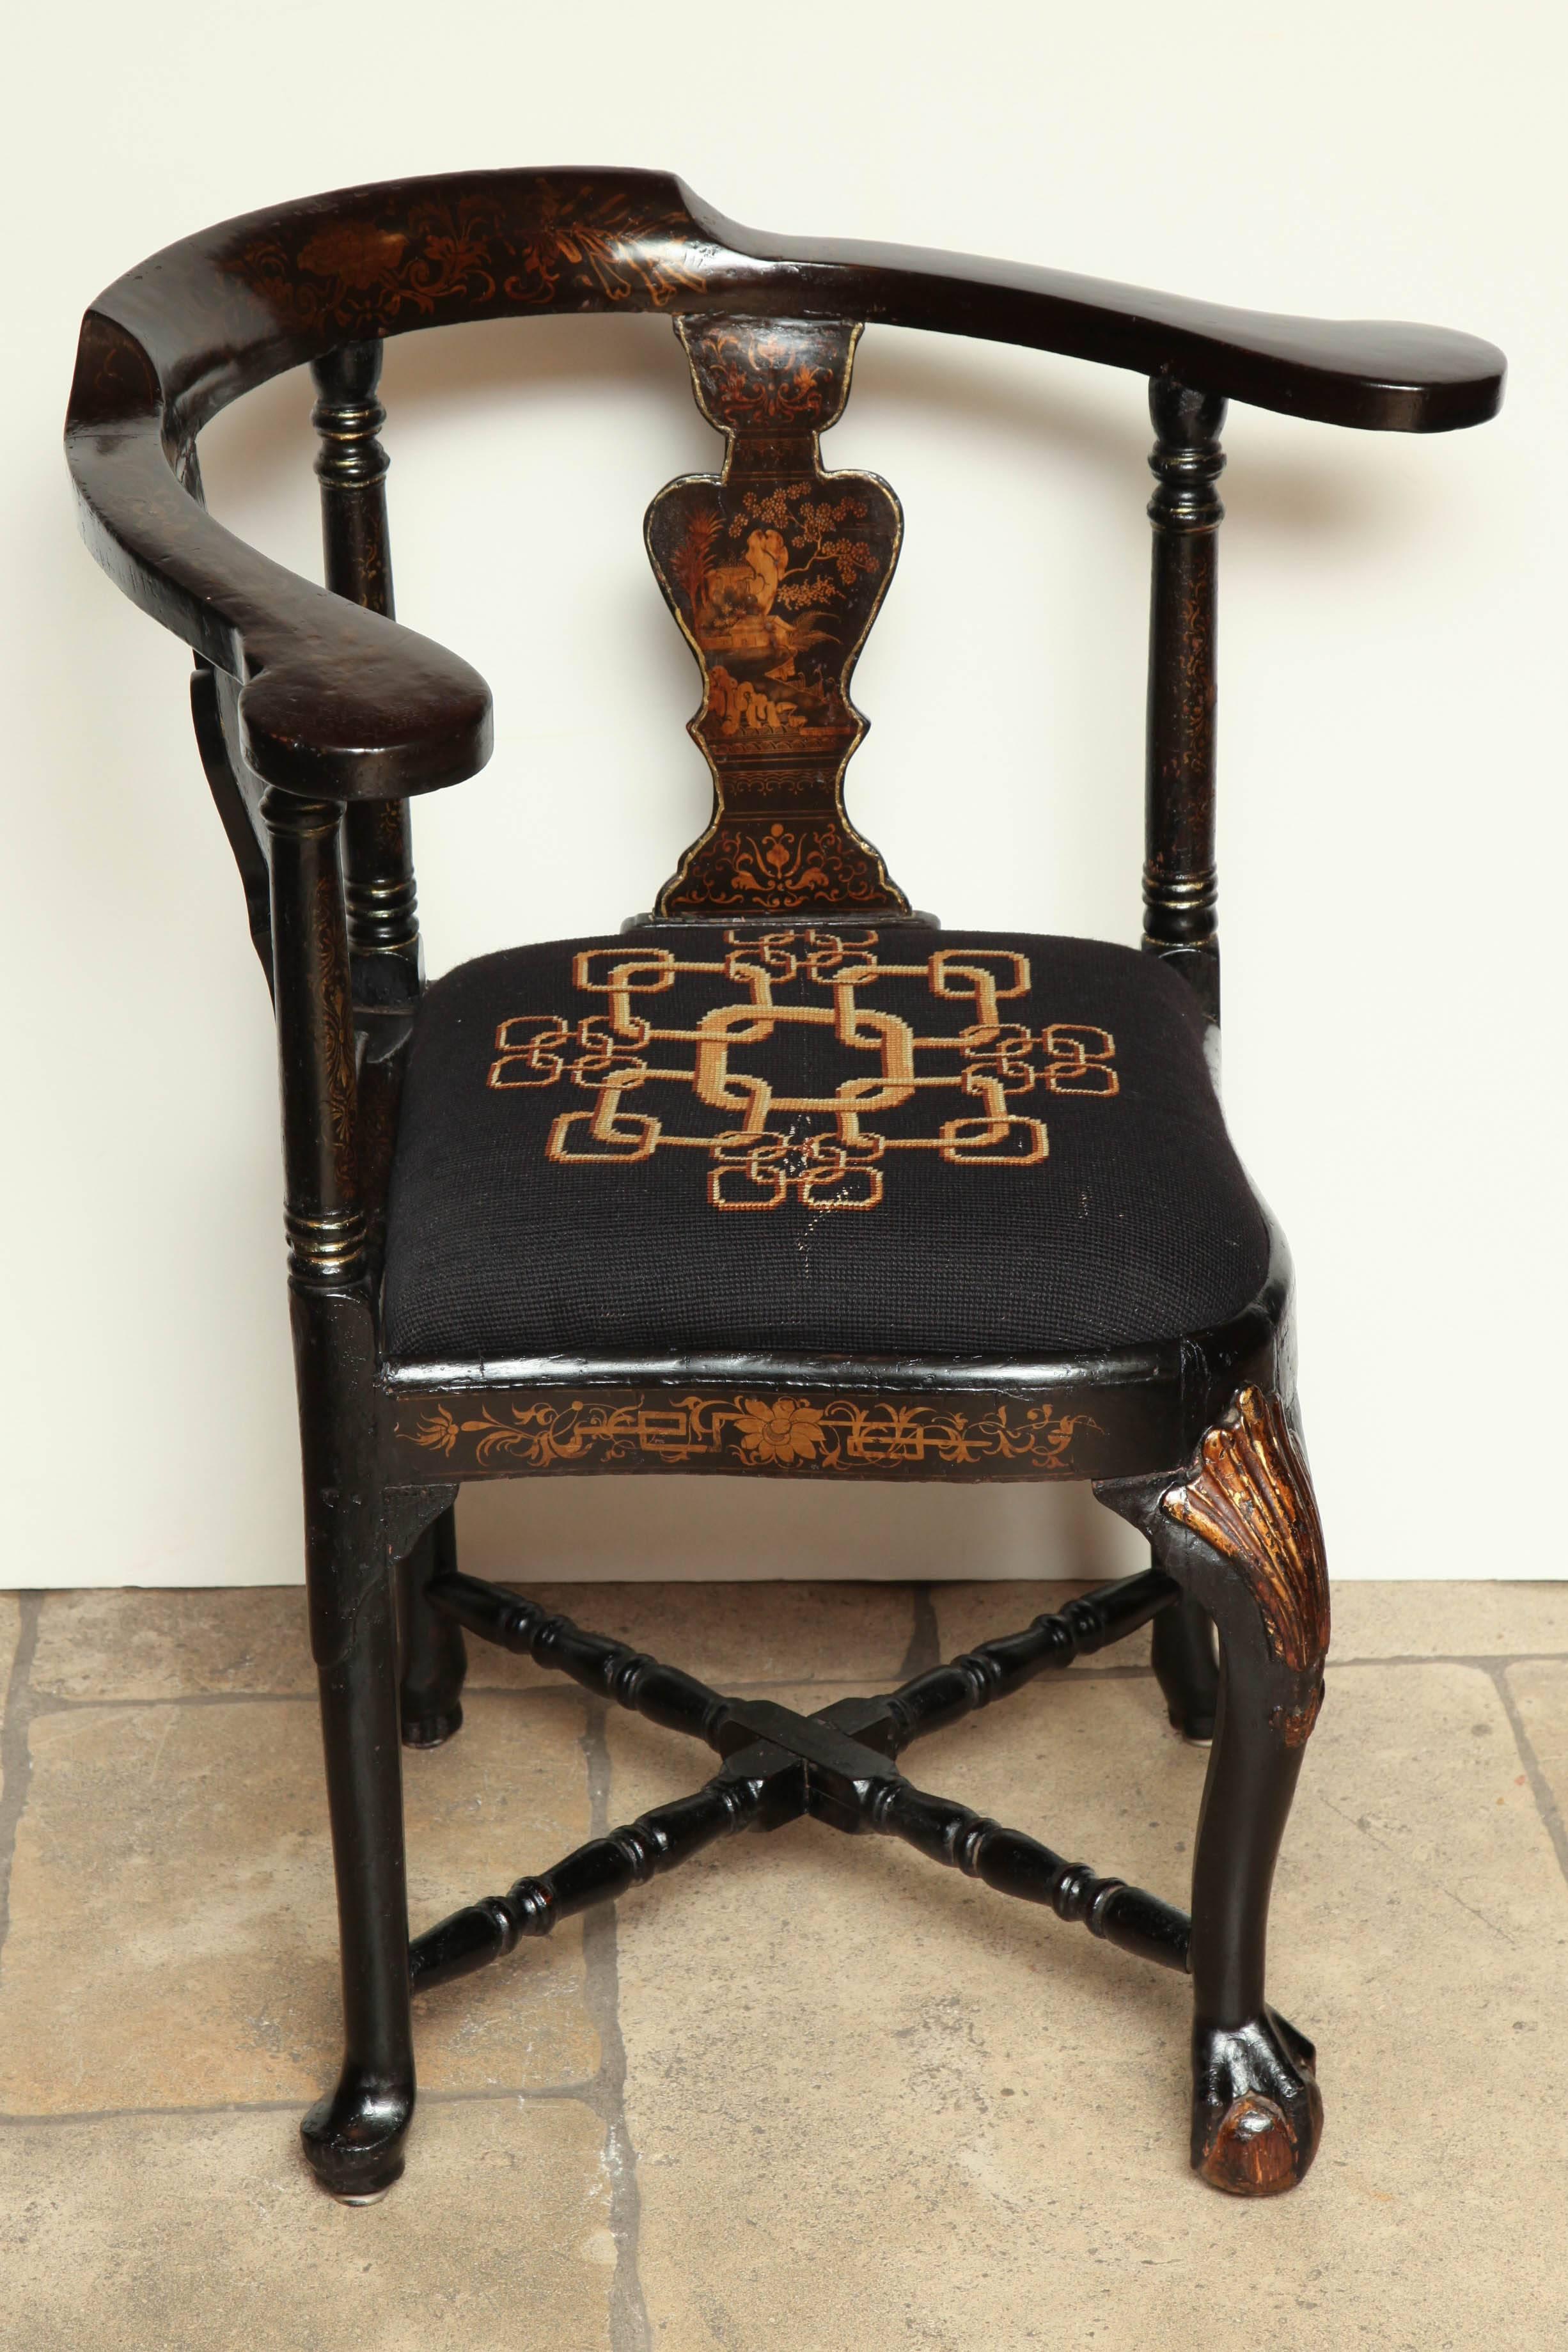 An unusual Queen Anne lacquered and chinoiserie decorated corner chair with urn form splats, compass seat, carved shell cabriole leg, stretcher base and ball and claw carved foot.